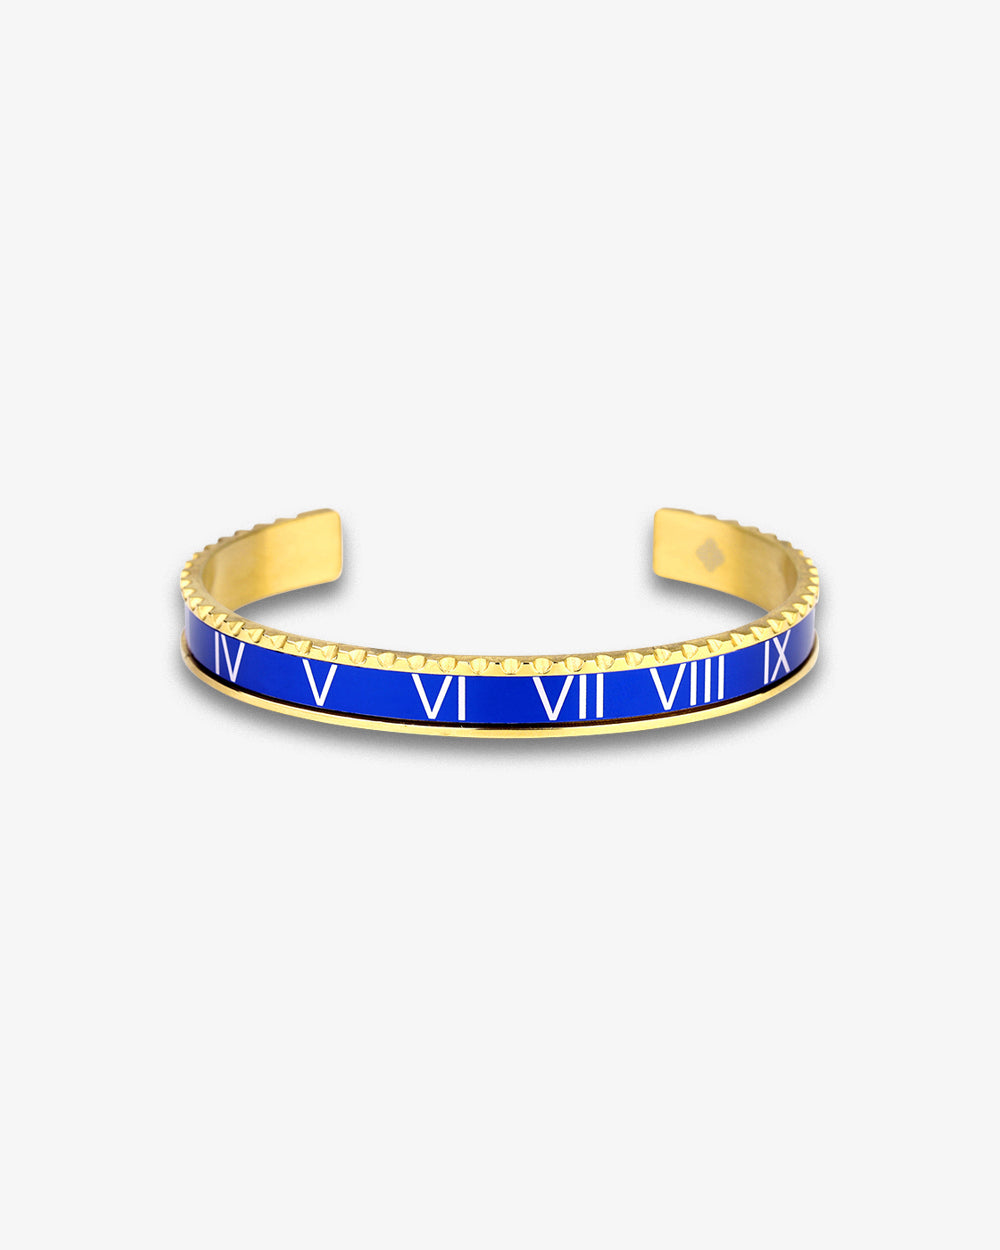 Swiss Concept Classic Roman Numeral Speed Bracelet (Blue & Yellow Gold) - Stainless Steel